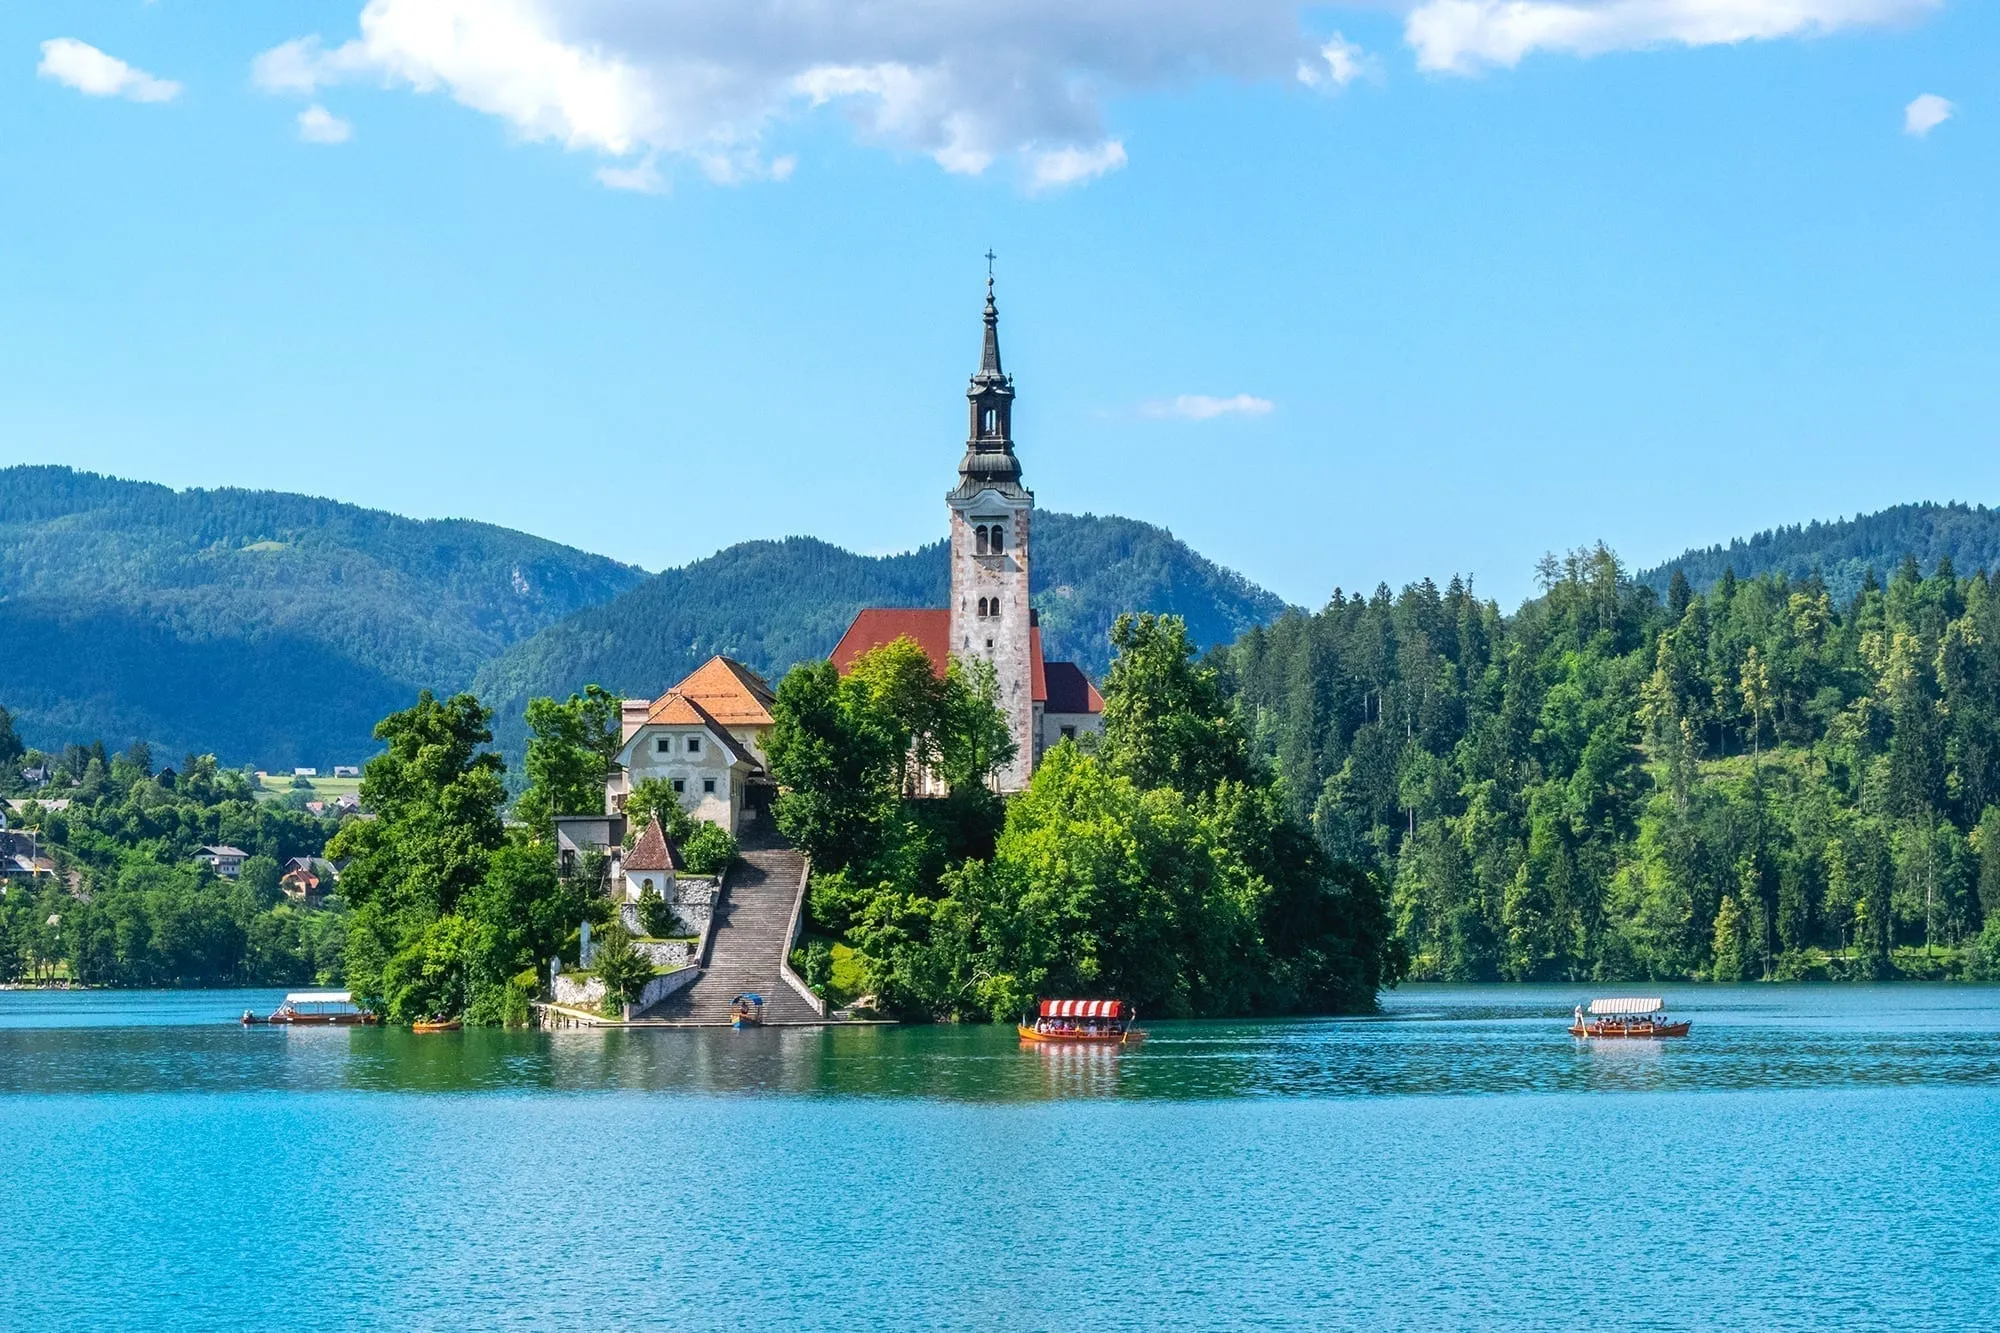 Bled Island in the center of Lake Bled in Slovenia, a must-see during a Slovenia road trip itinerary